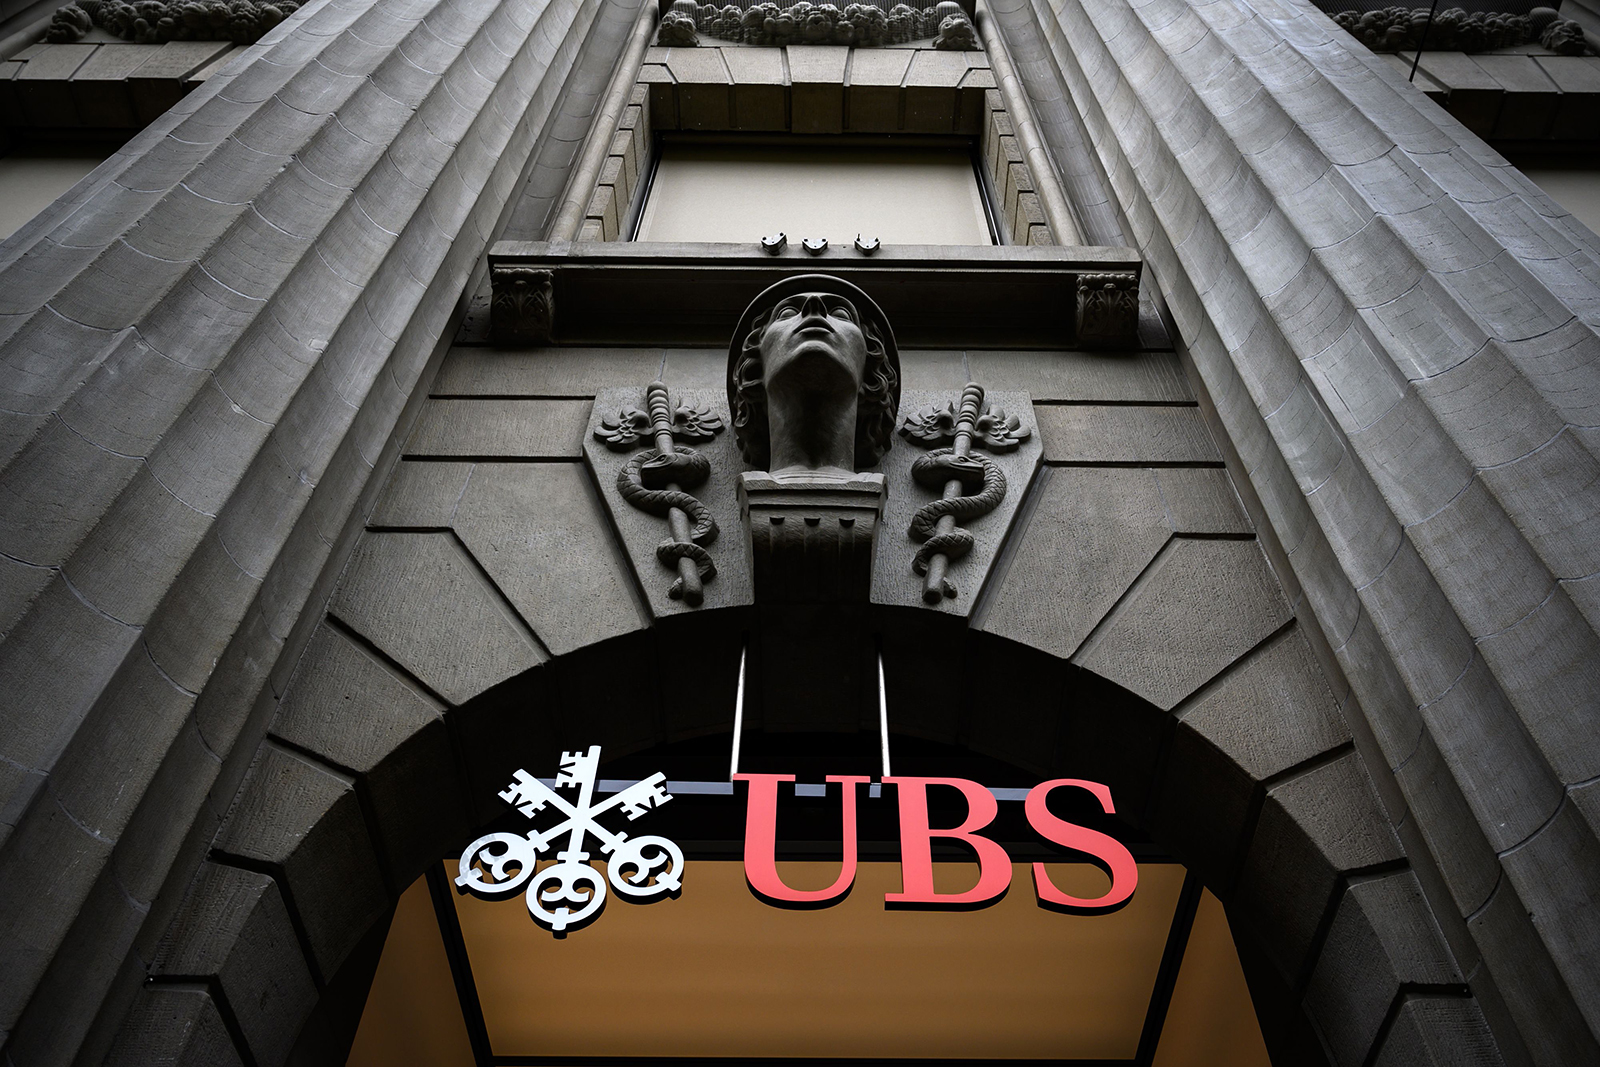 A sign of Swiss banking giant UBS is seen on their headquarters in May 2019 in Zurich, Switzerland..